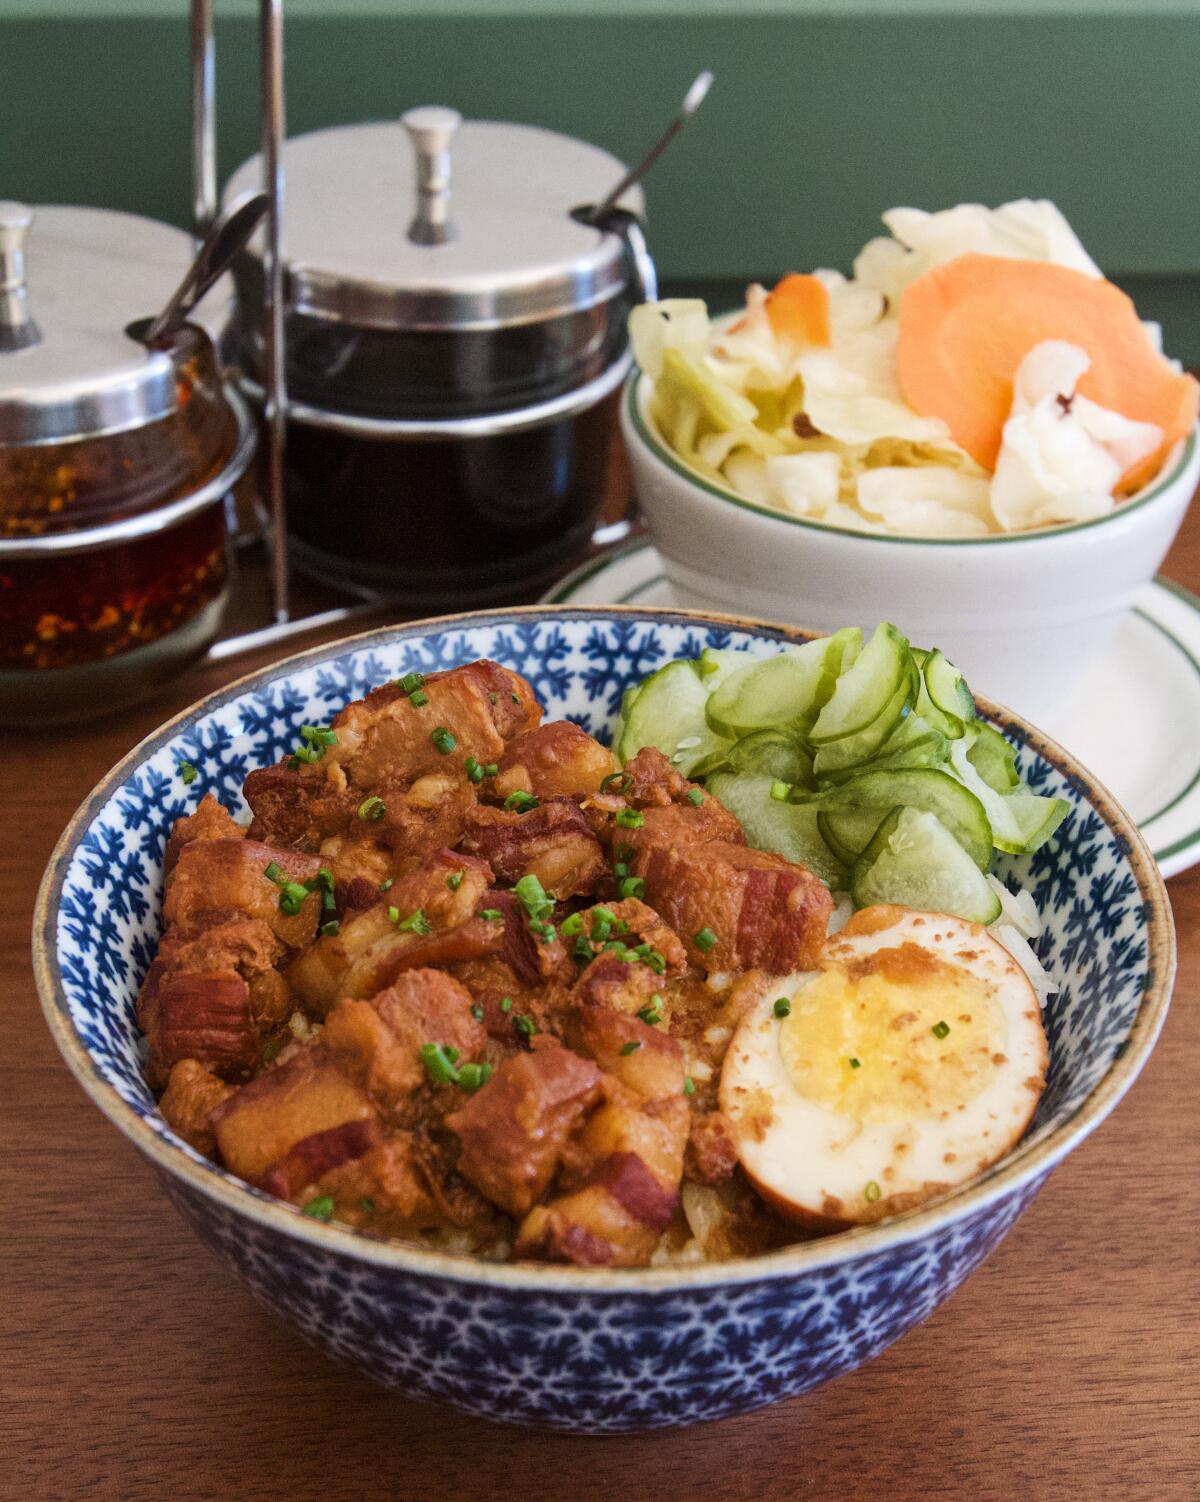 A bowl of braised pork belly with rice and egg from Liu's Cafe, with two jars of condiments and a bowl of pickled cabbage